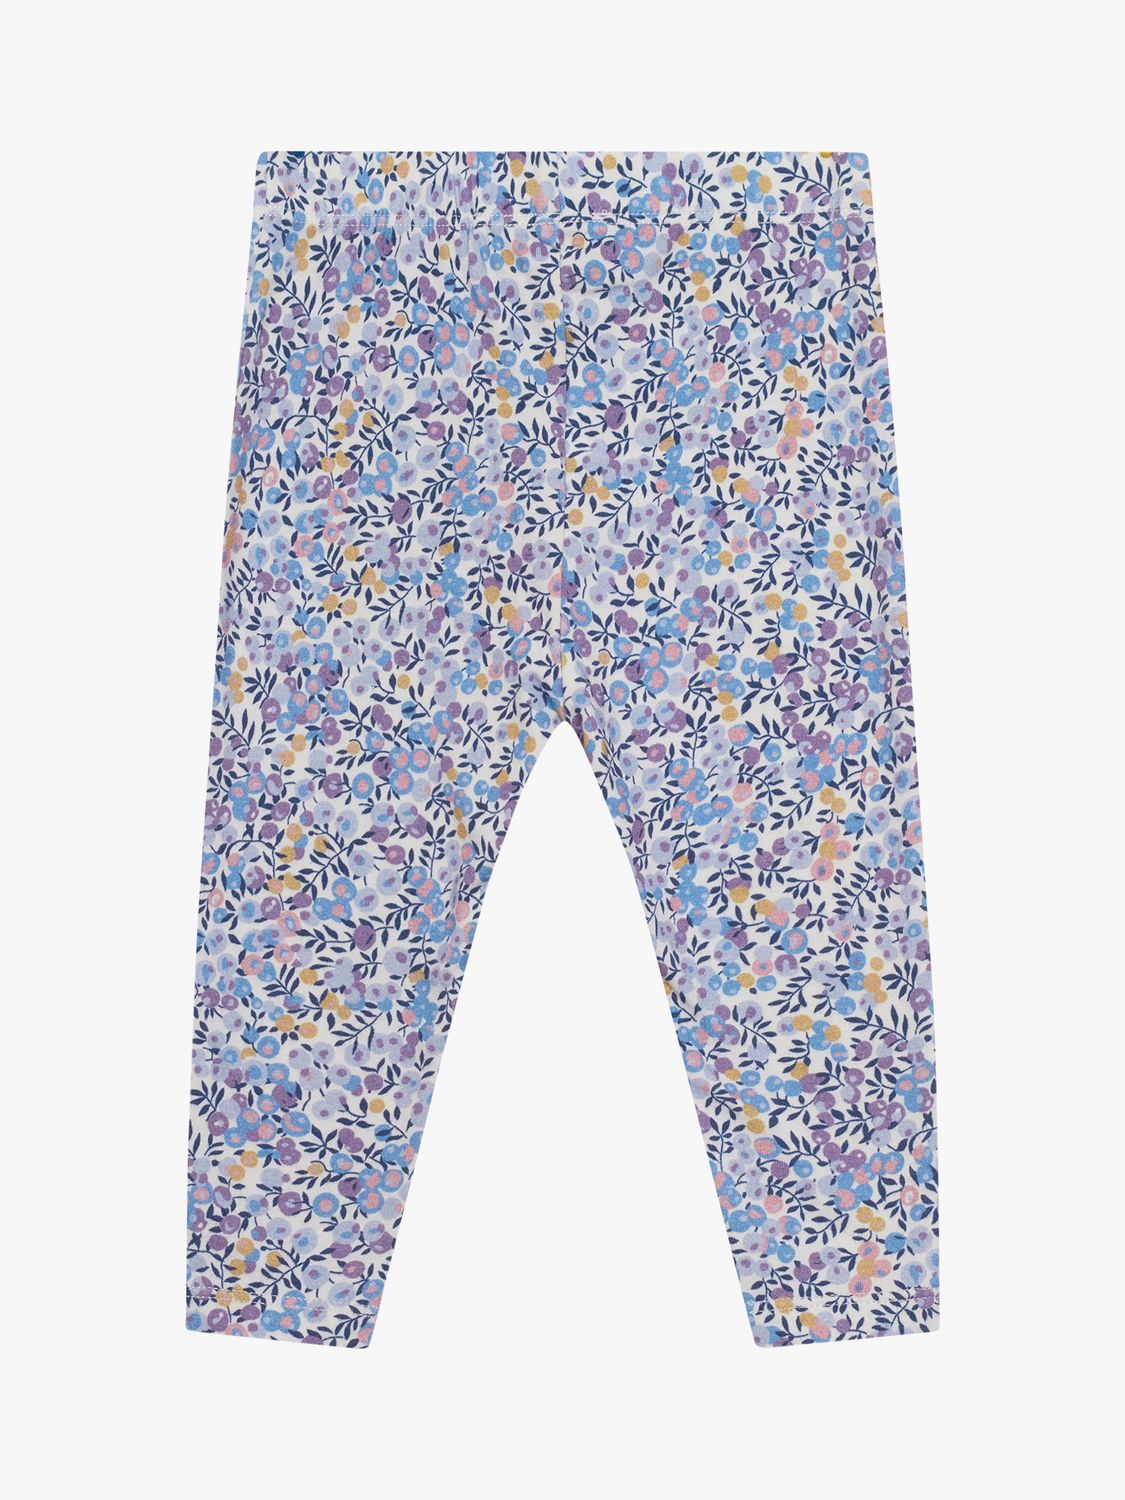 Trotters Baby Liberty's Wiltshire Floral Print Leggings, Lilac, 6-12 months